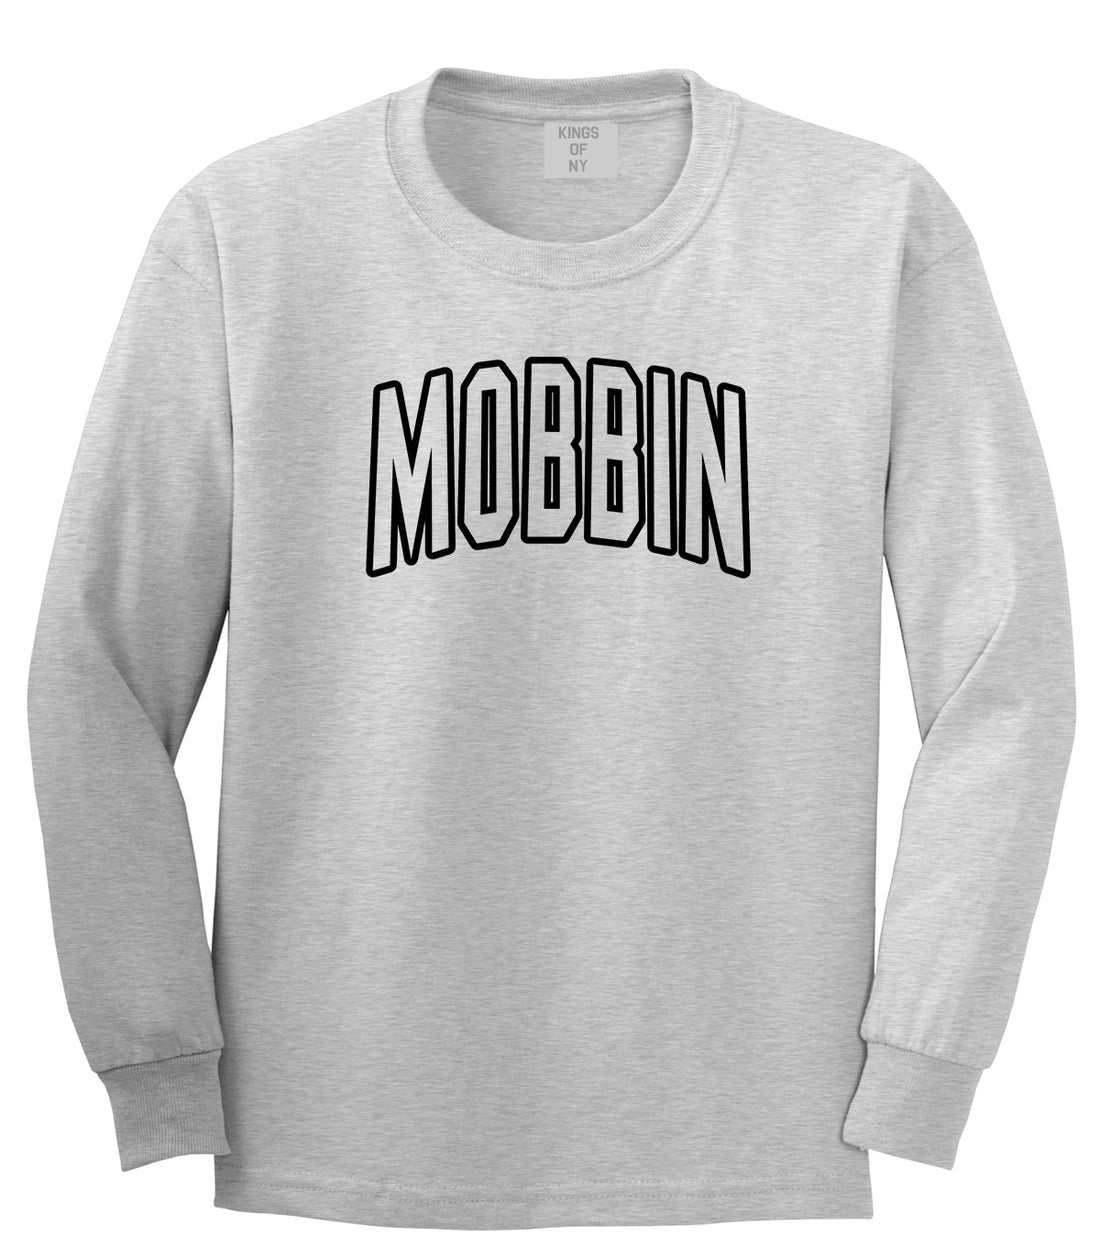 Mobbin Outline Squad Mens Long Sleeve T-Shirt Grey by Kings Of NY